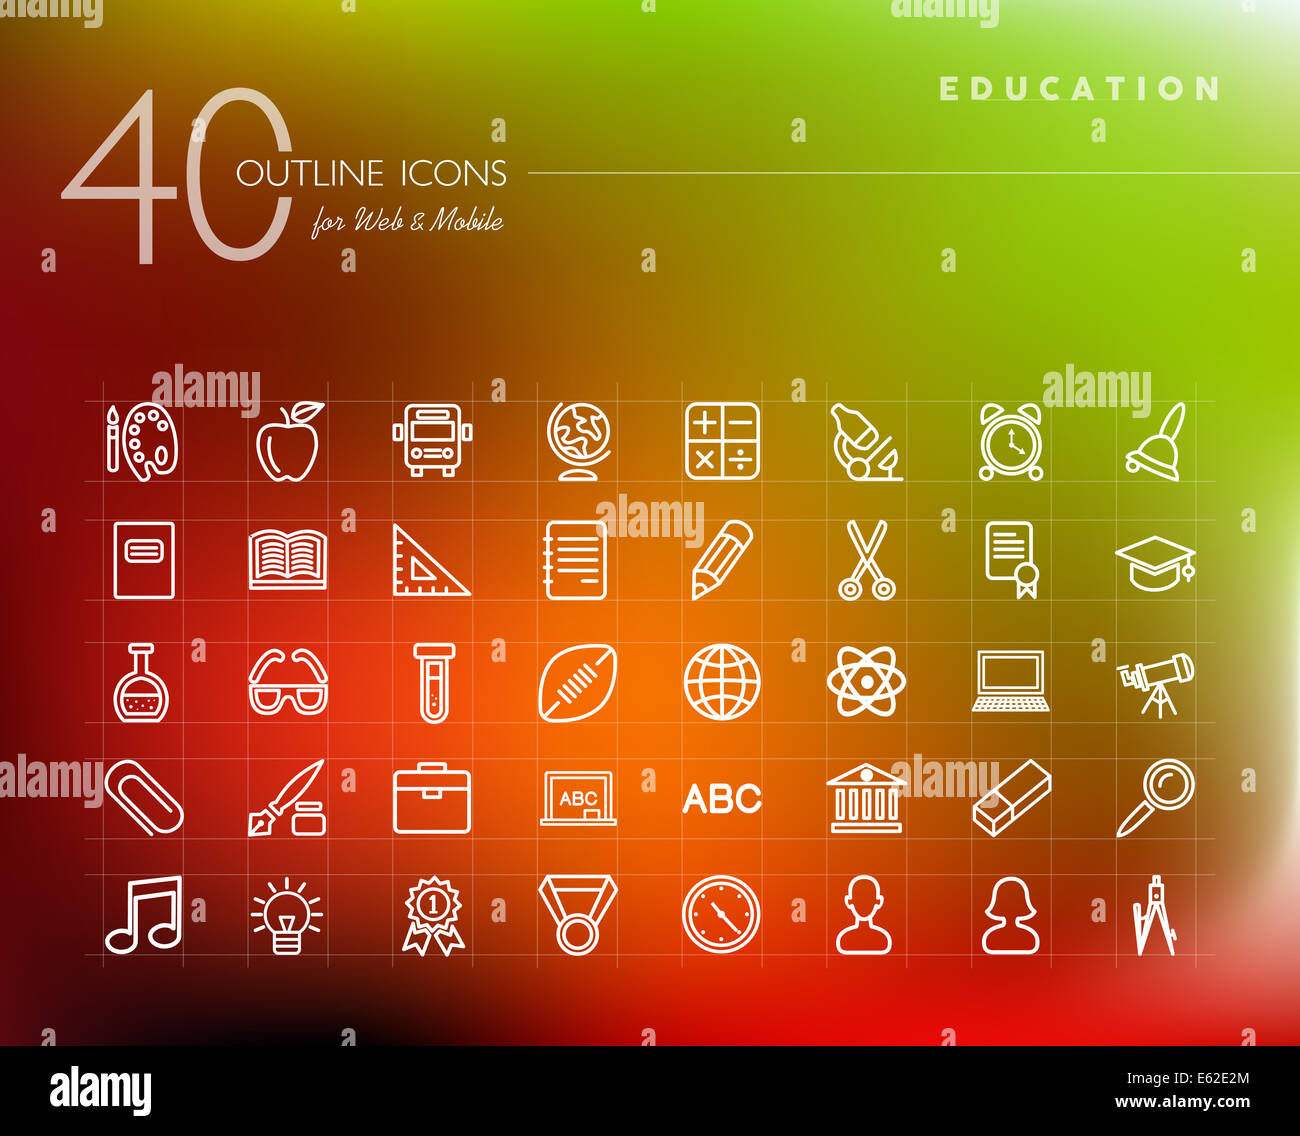 Education thin line icons set for web and mobile app. EPS10 vector file organized in layers for easy editing. Stock Photo